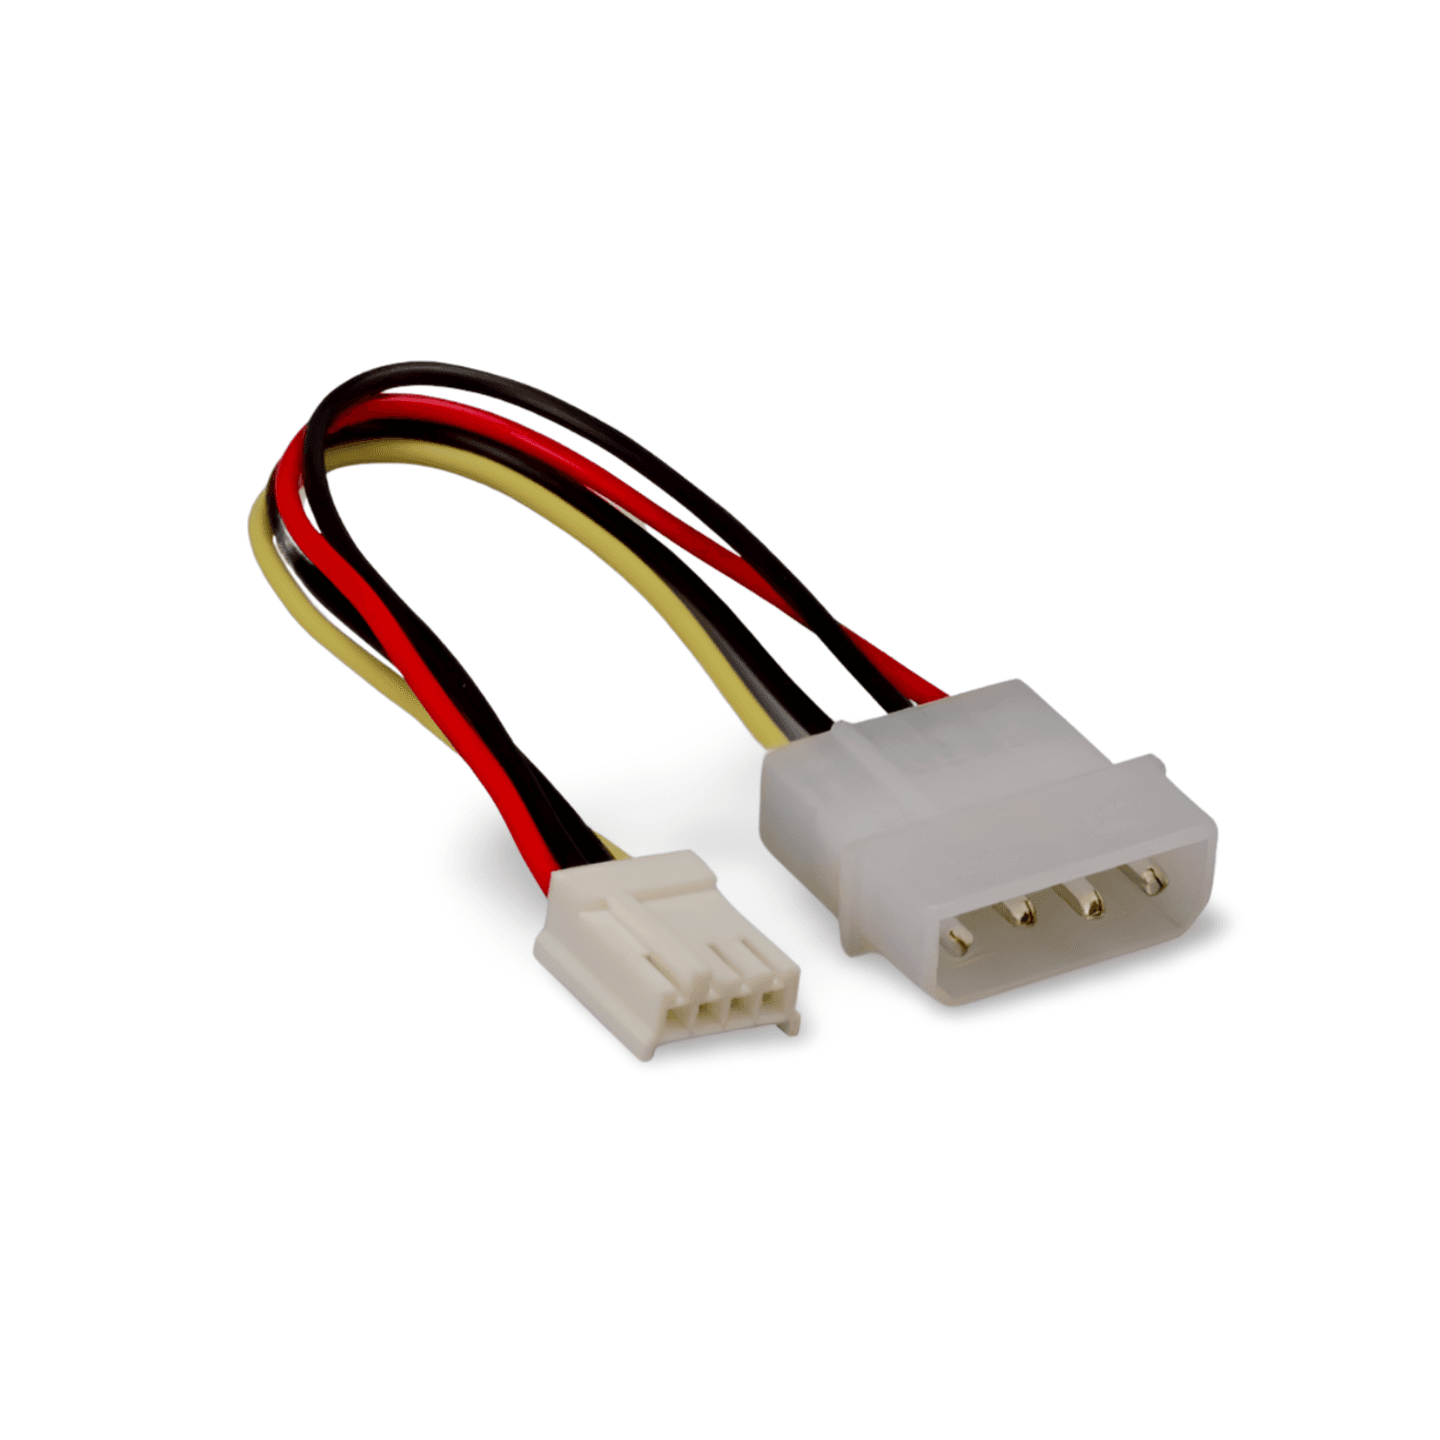 6in Power Cable 5.25 to 3.5 Adapter Molex black